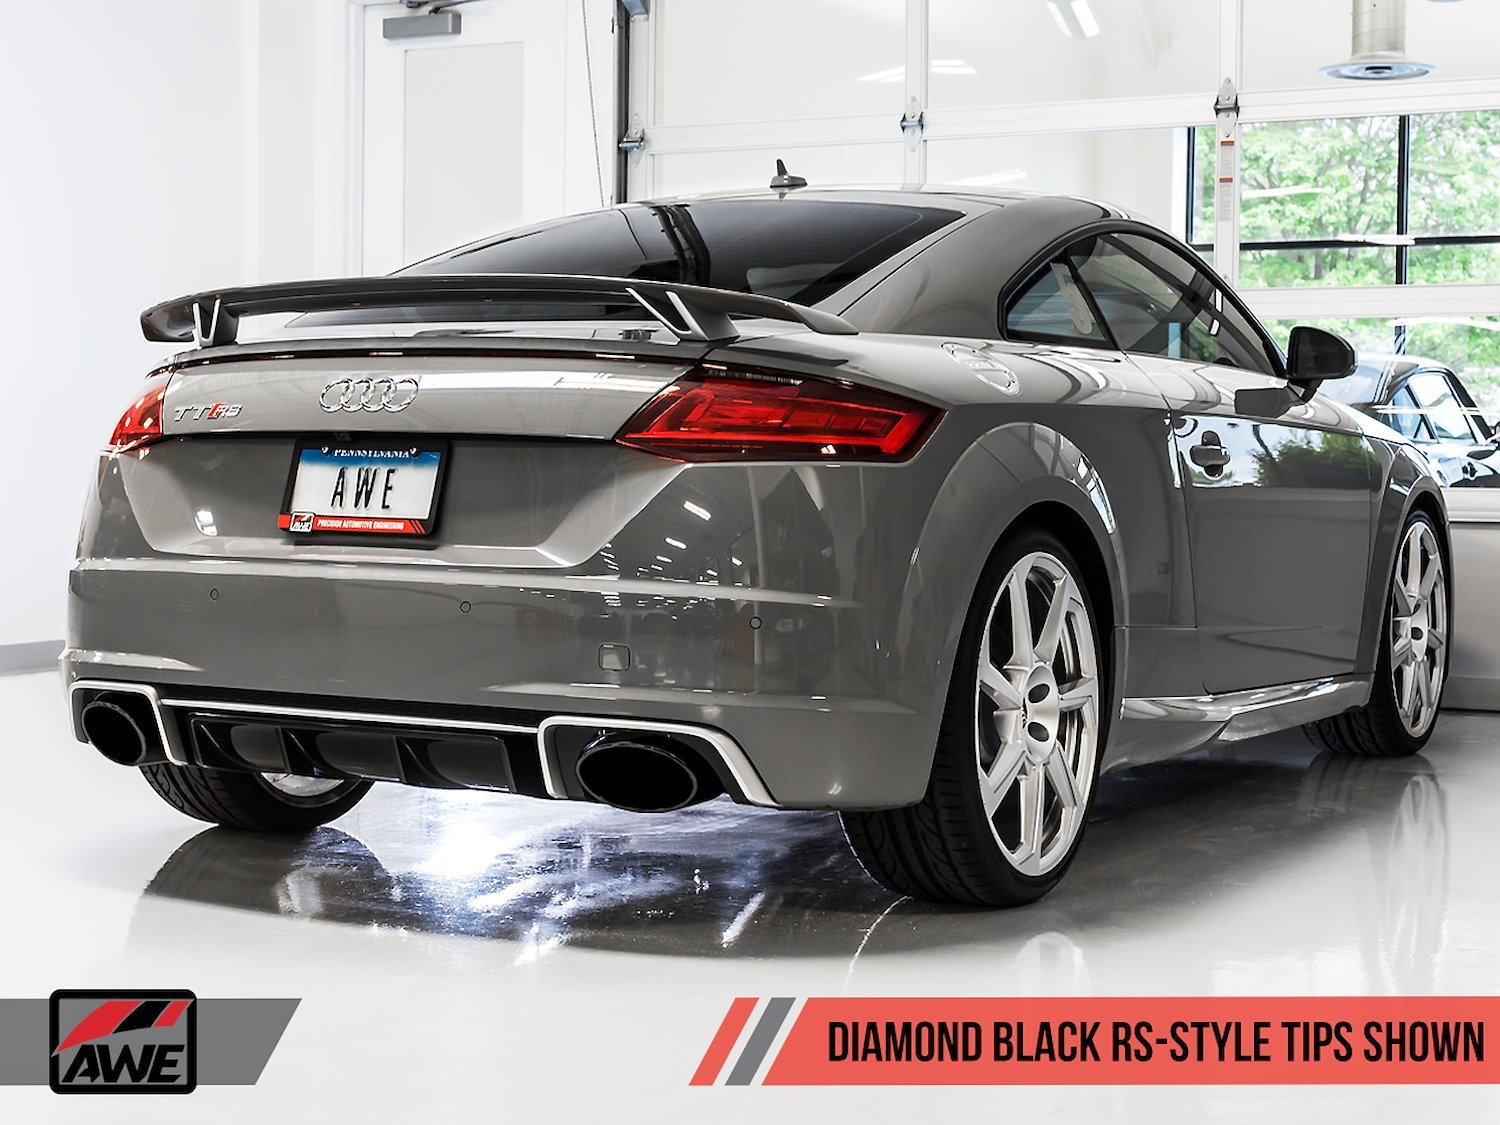 AWE Track Edition Exhaust for Audi MK3 TT RS - Diamond Black RS-style Tips